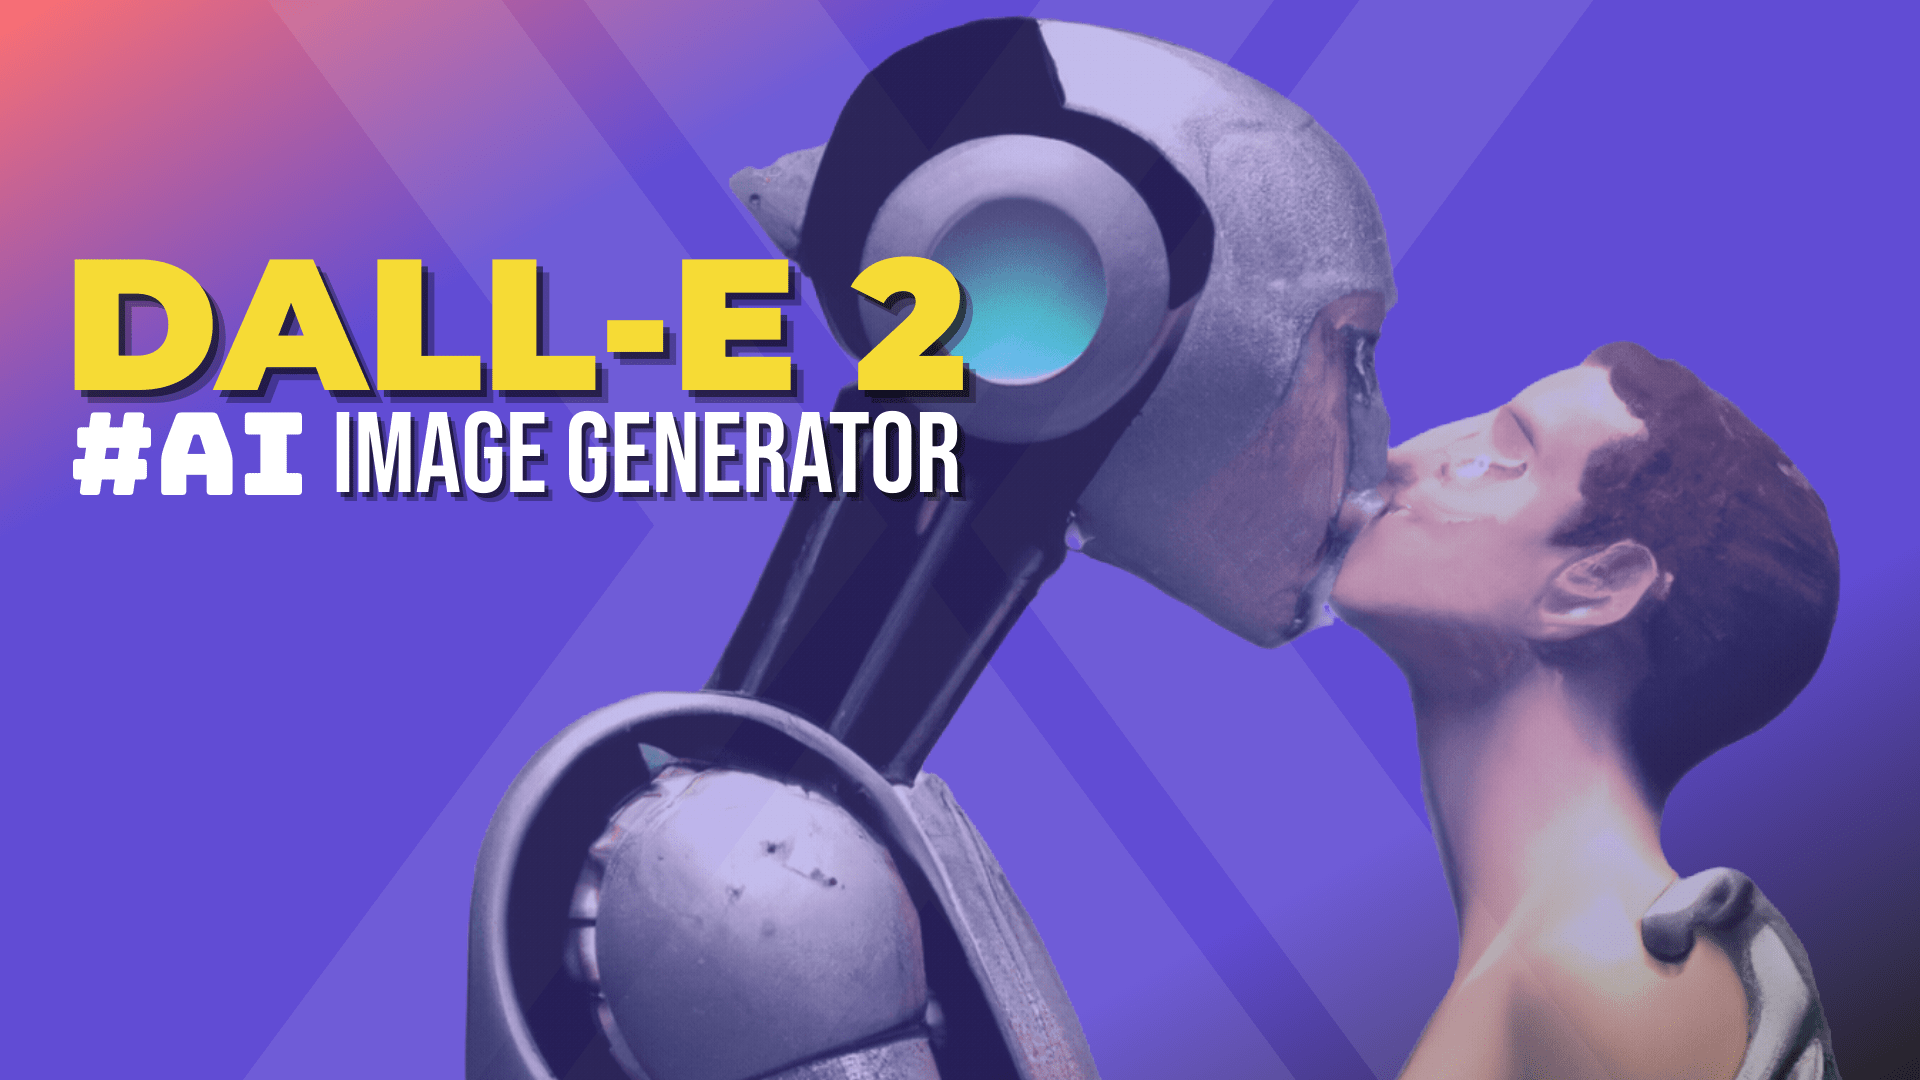 ‘Robot licking human’: DALL-E 2 can create intimate images, but don’t expect AI porn